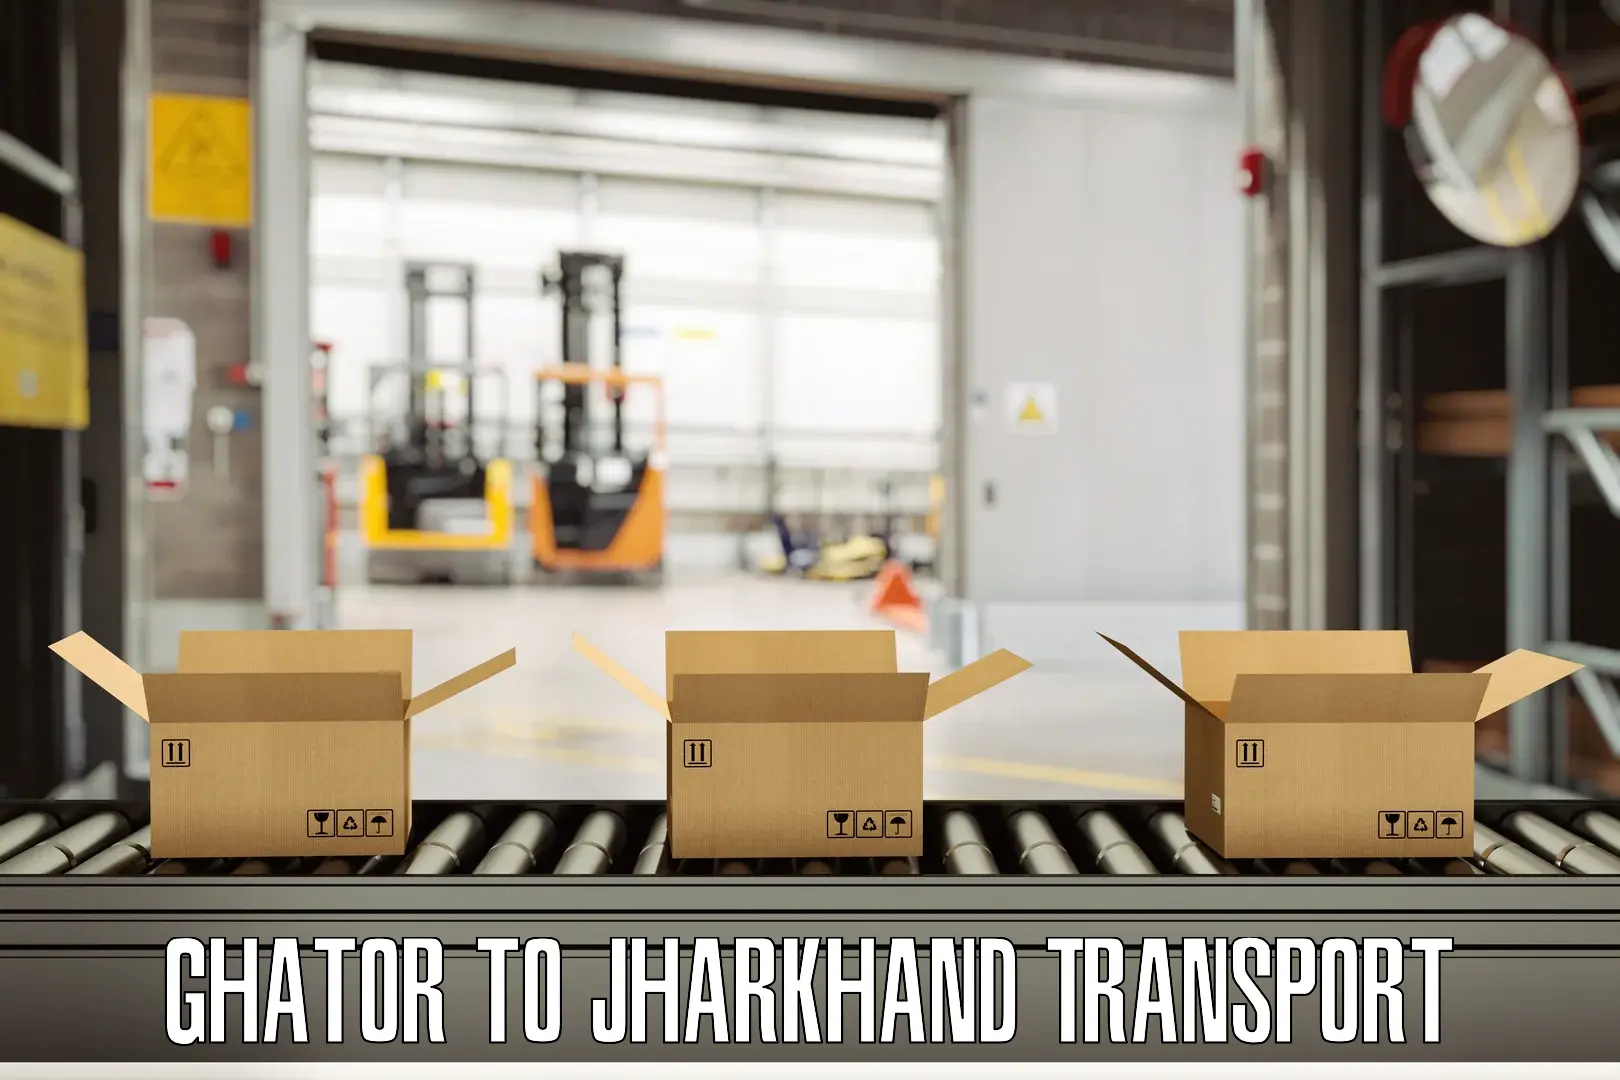 Transport shared services Ghator to Jharkhand